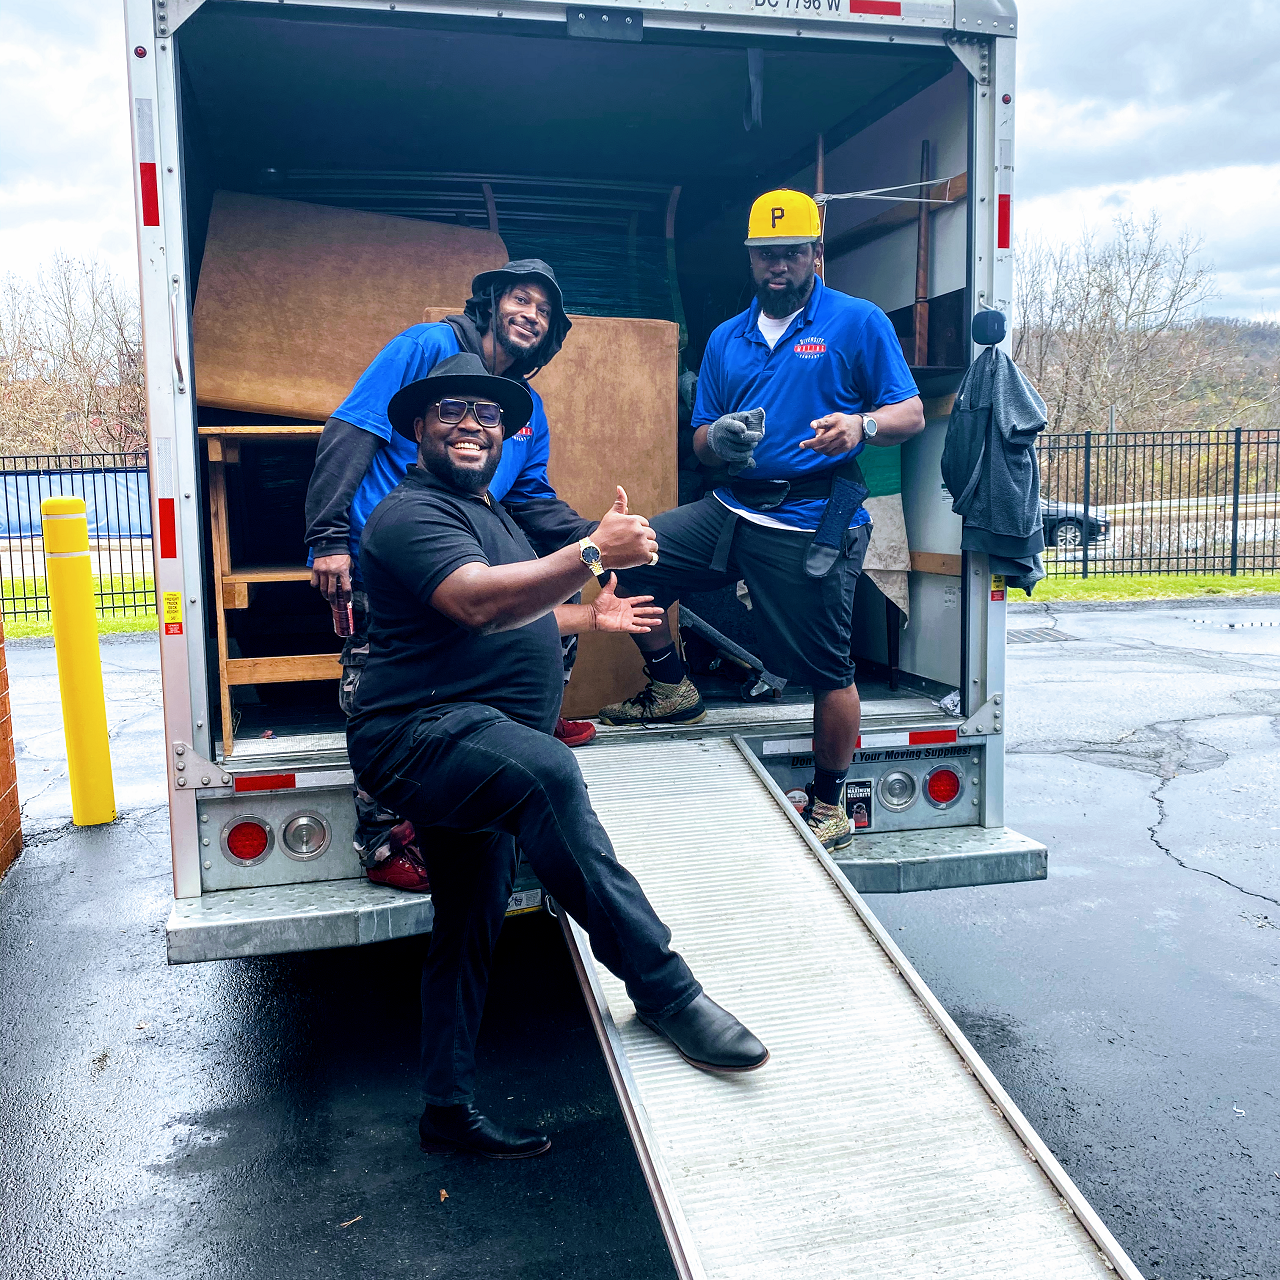 Diversity Moving Company Best Moving Company in Monroeville